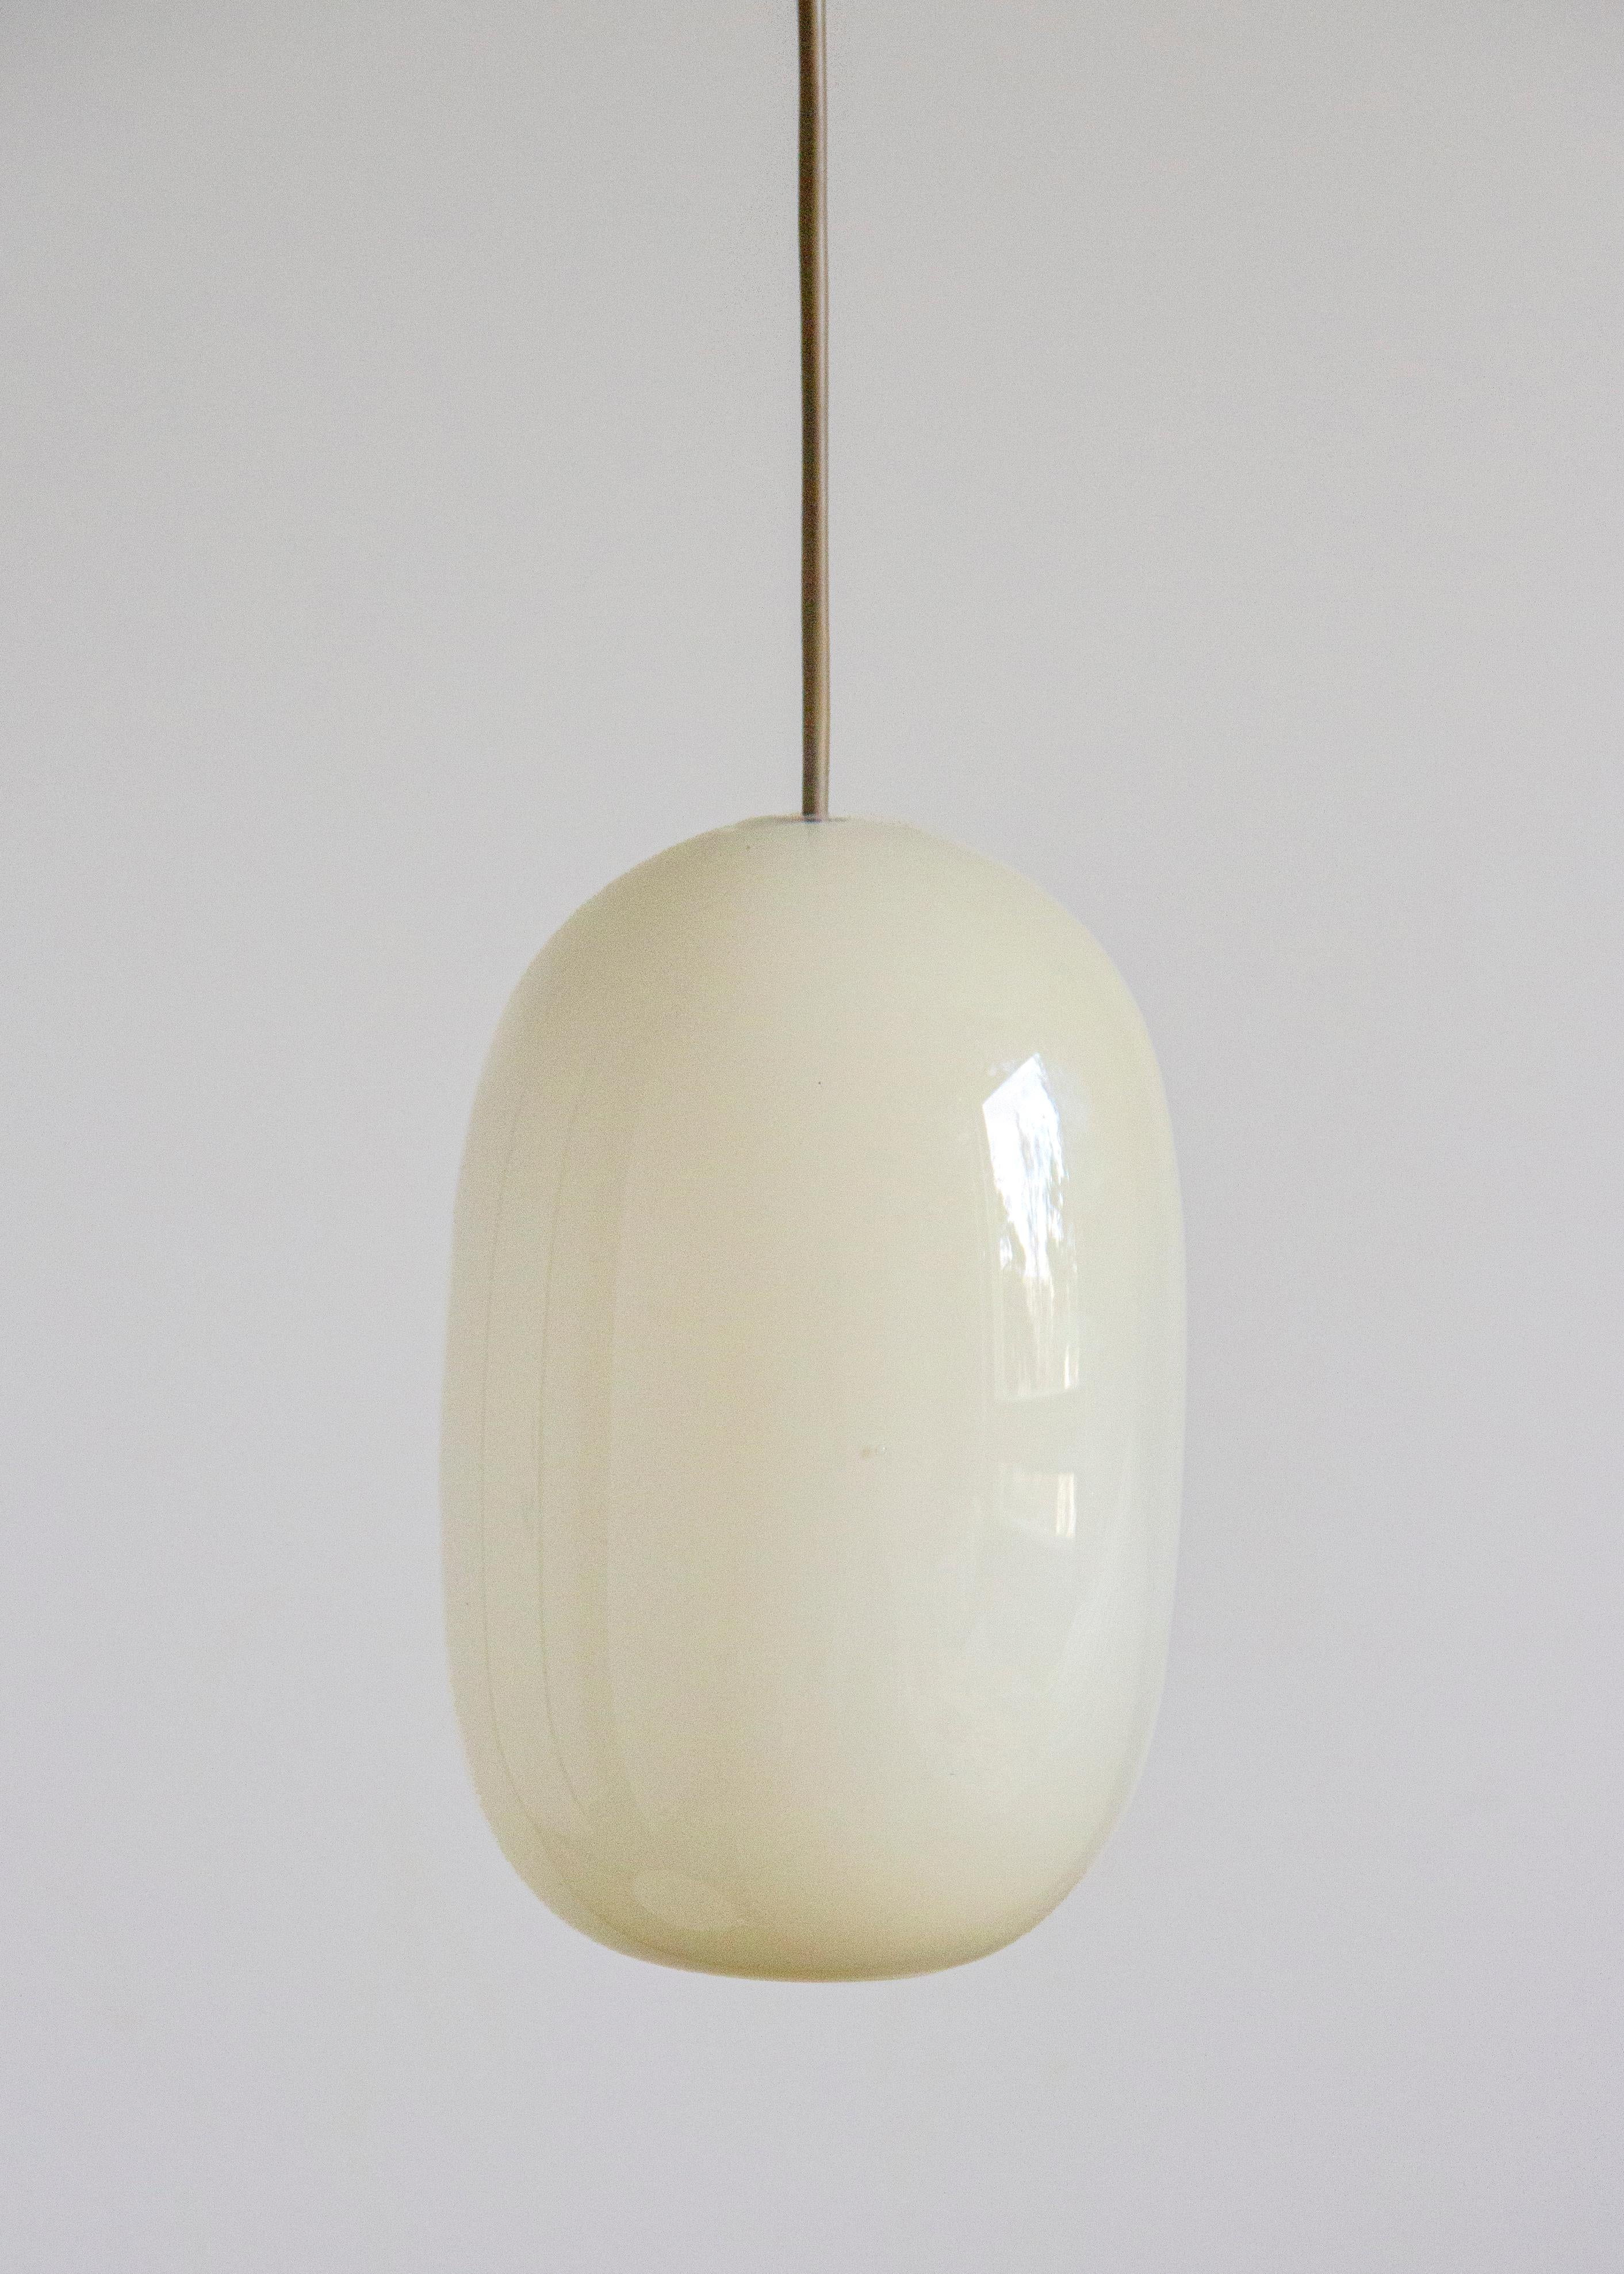 Finnish Sculptural Light No. 29 by Milla Vaahtera For Sale